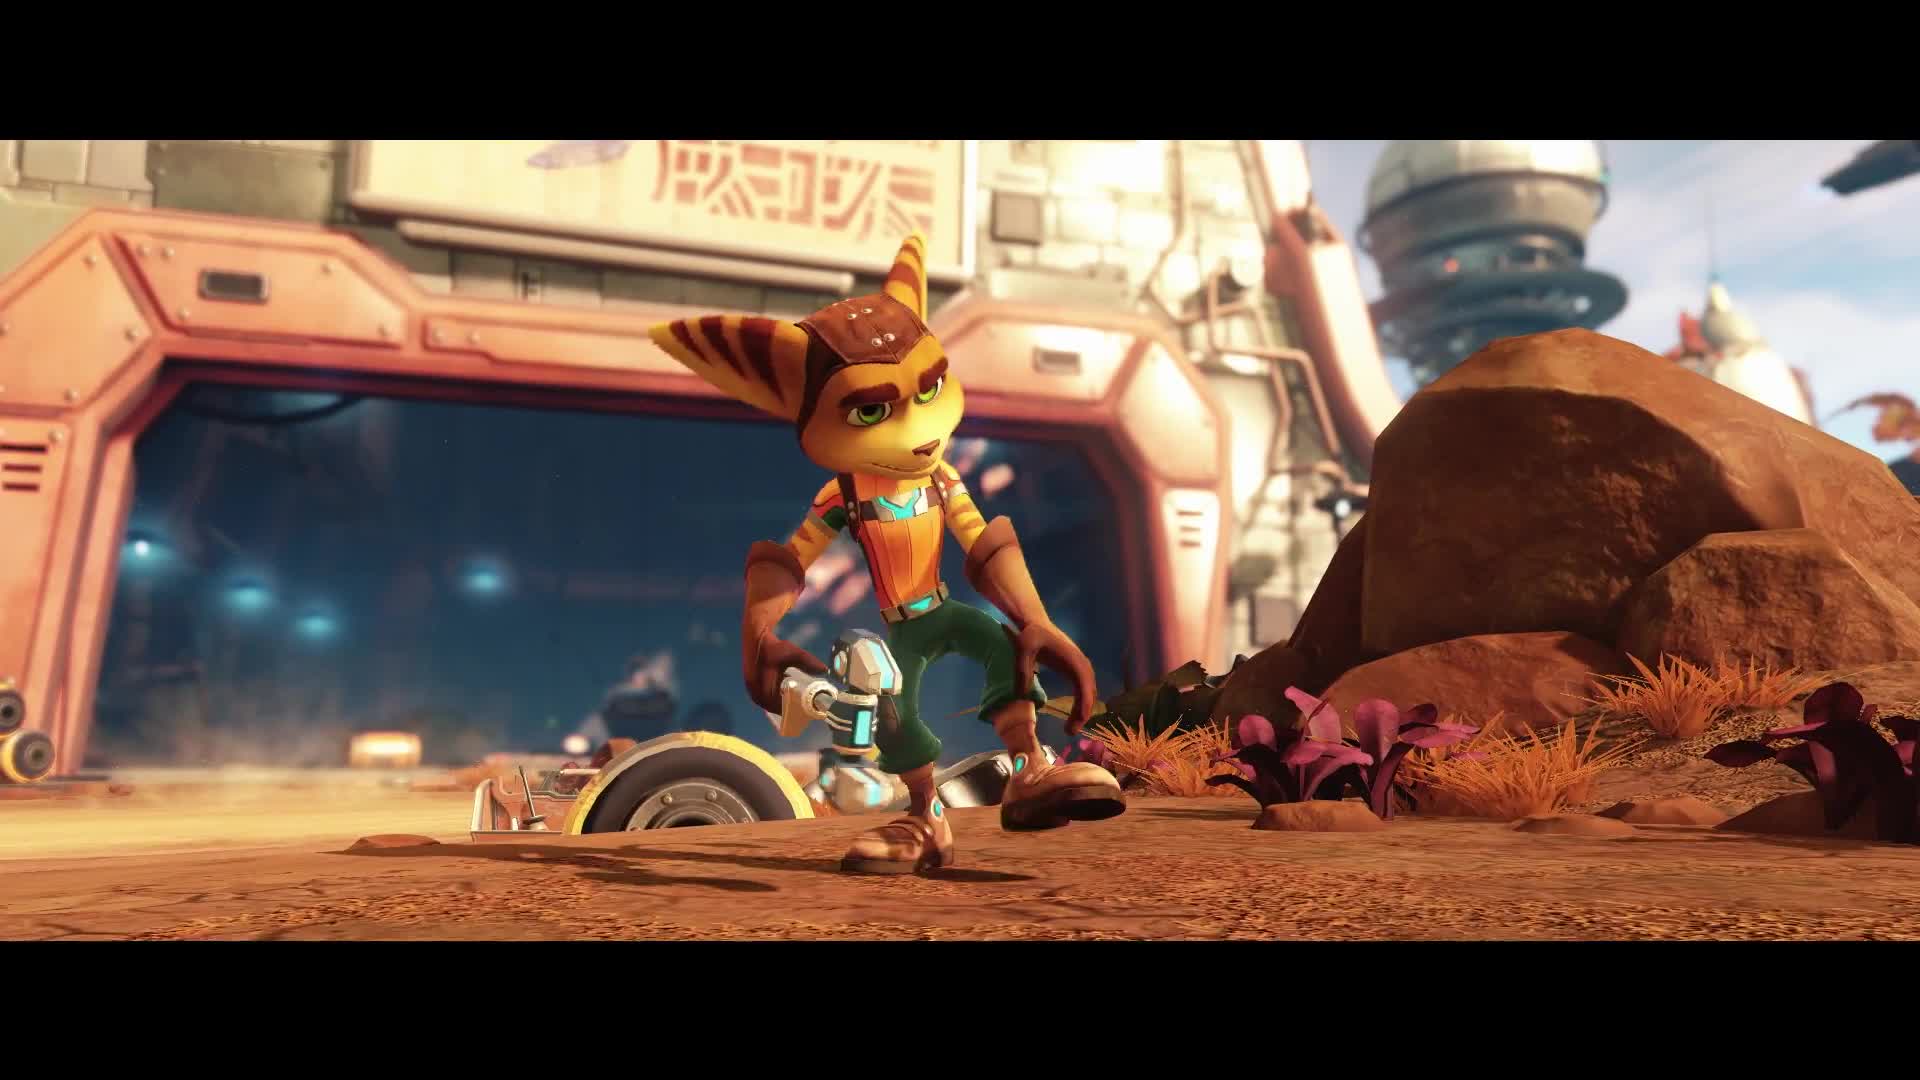 Ratchet and Clank - story trailer